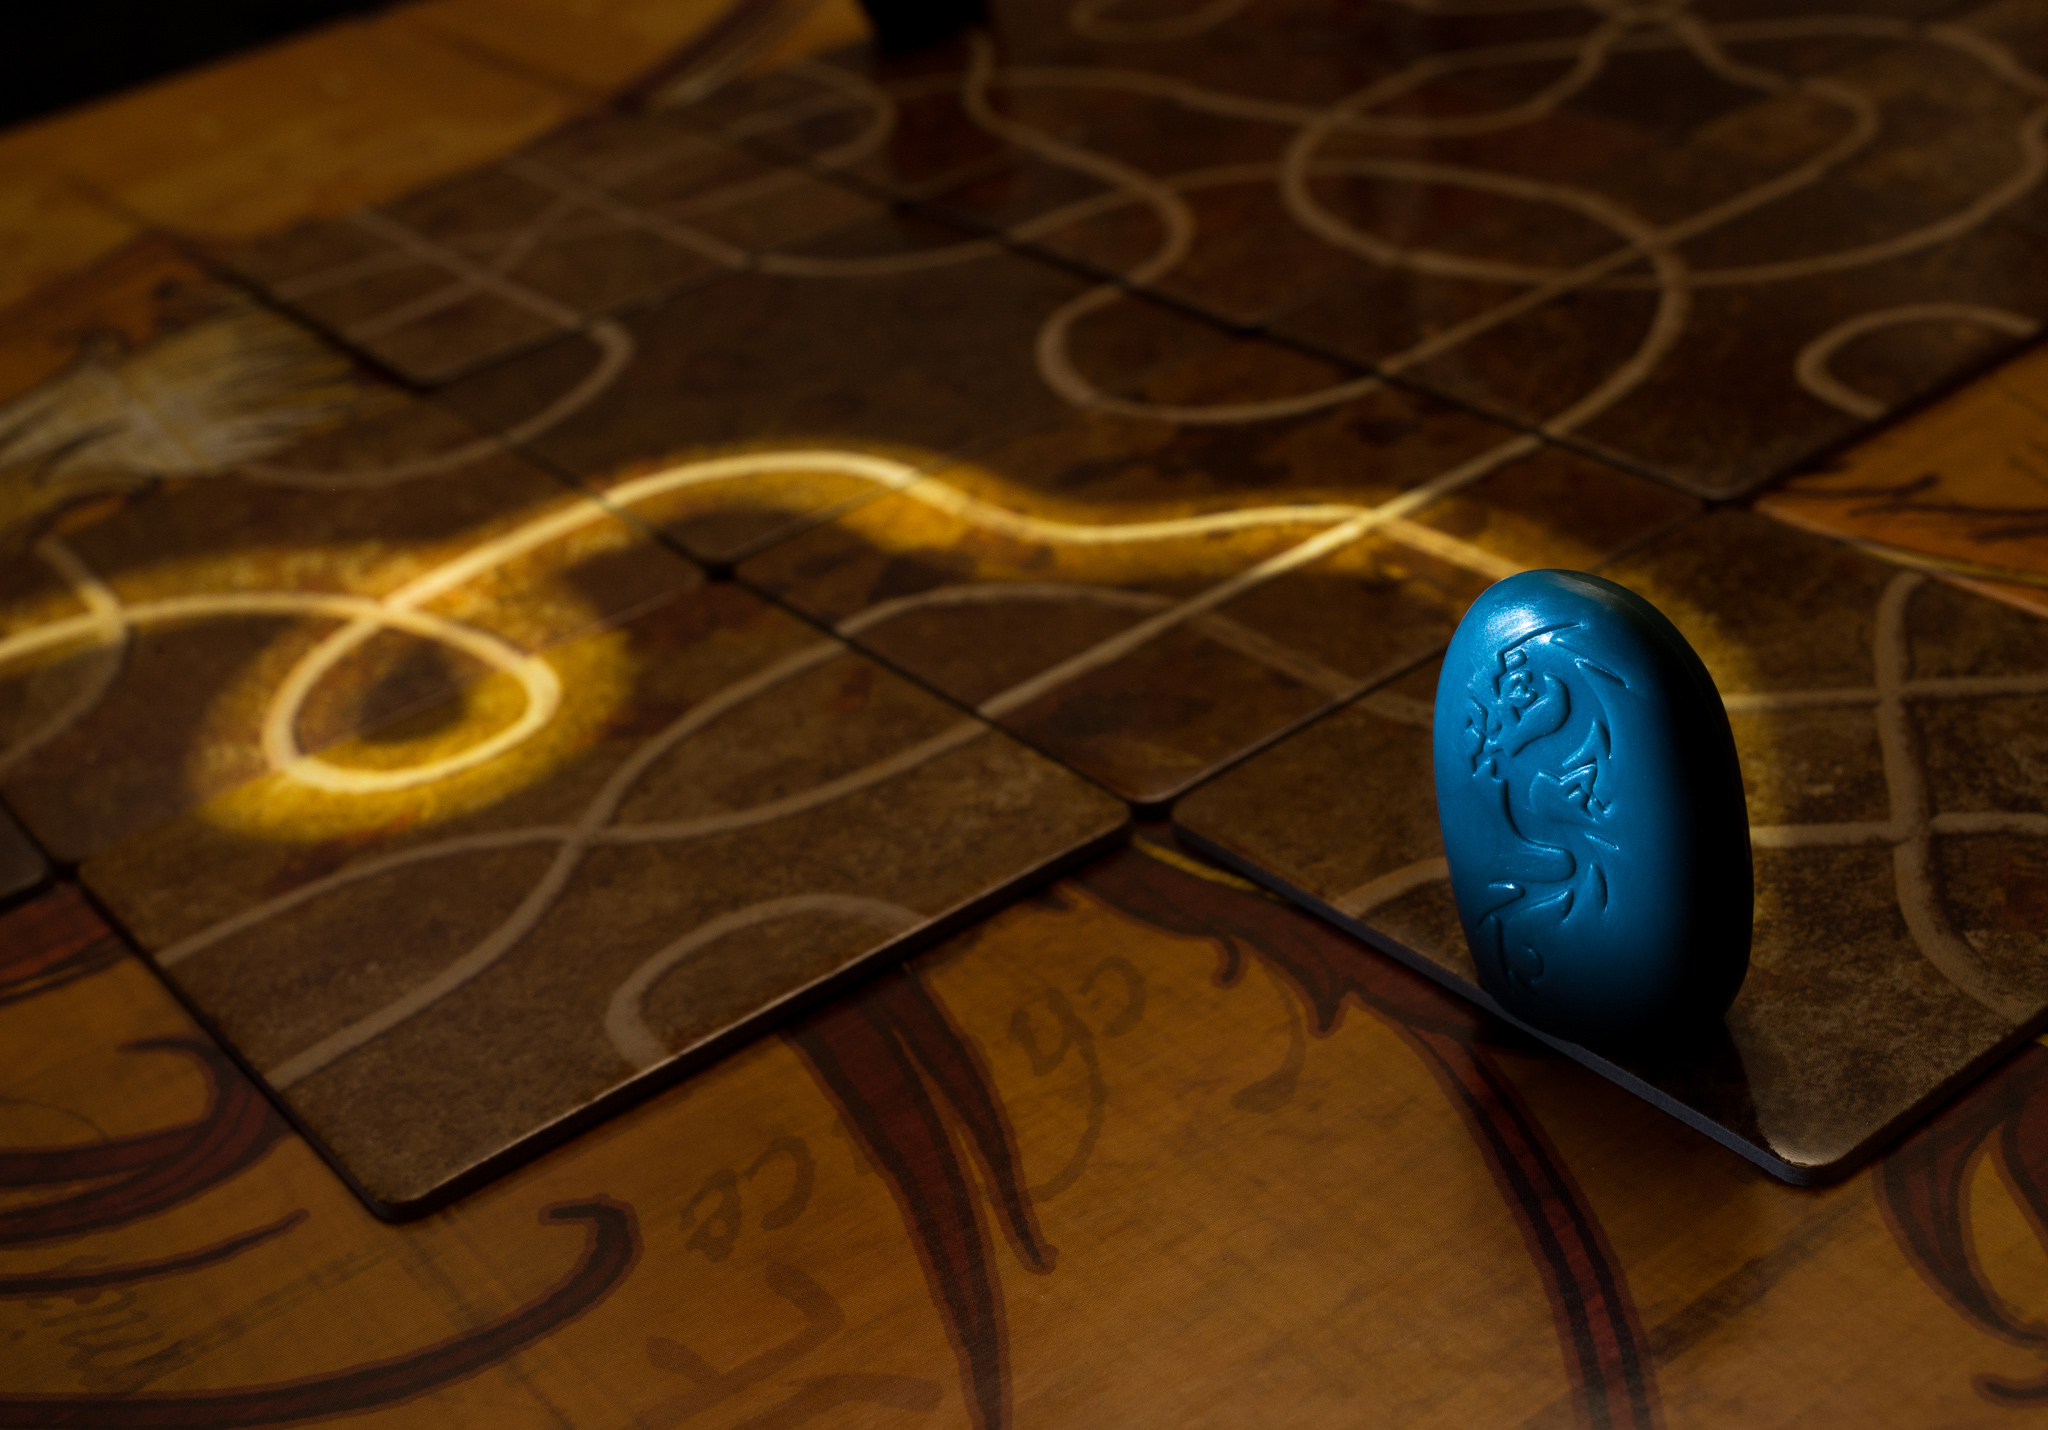 Tsuro tile laying game of the path